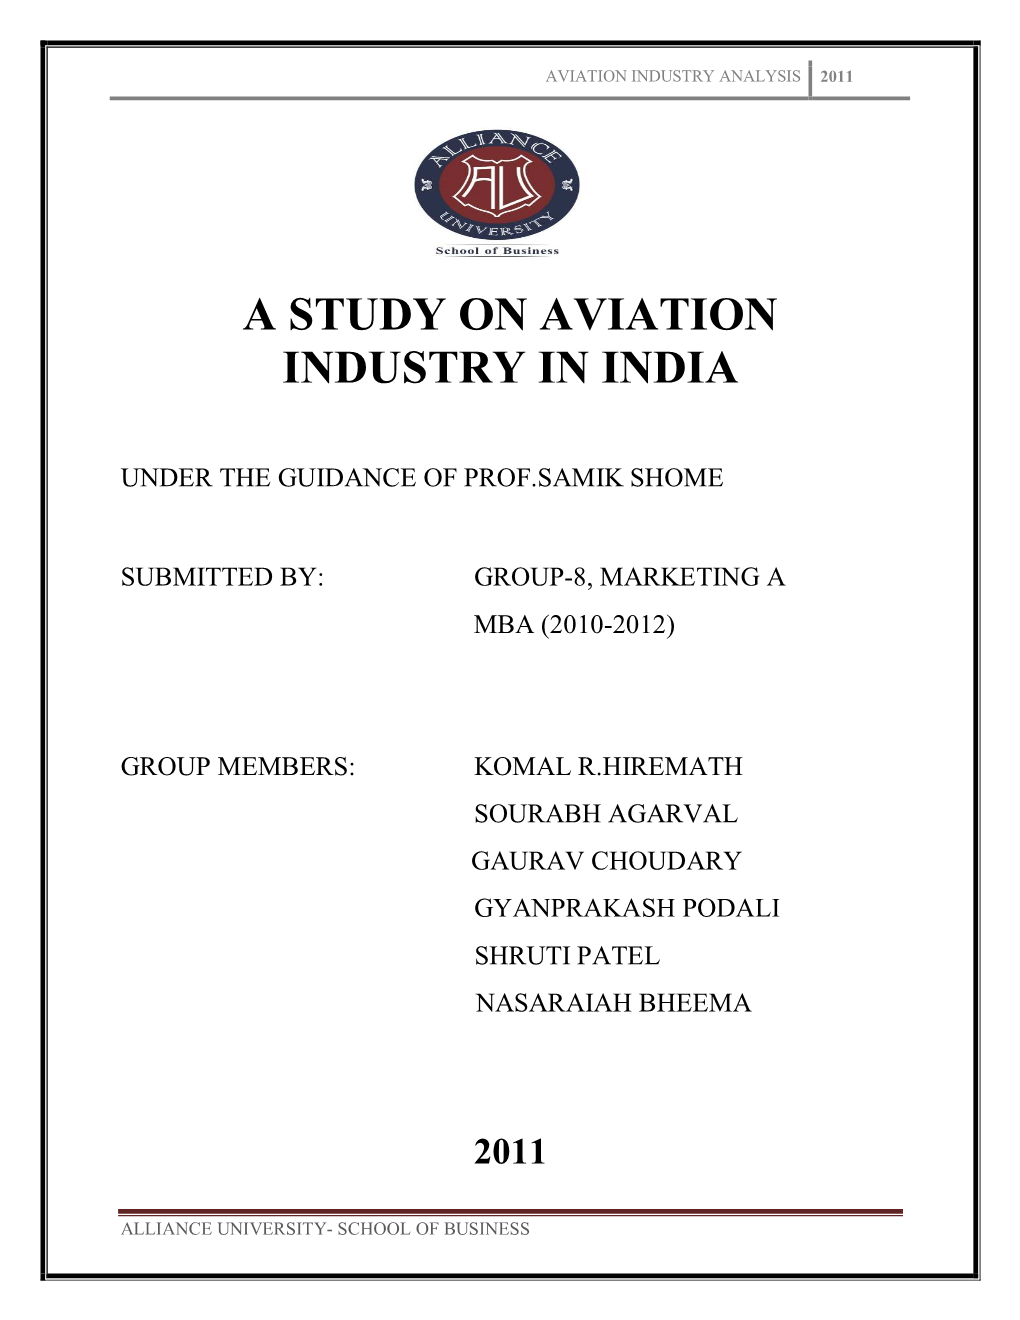 A Study on Aviation Industry in India